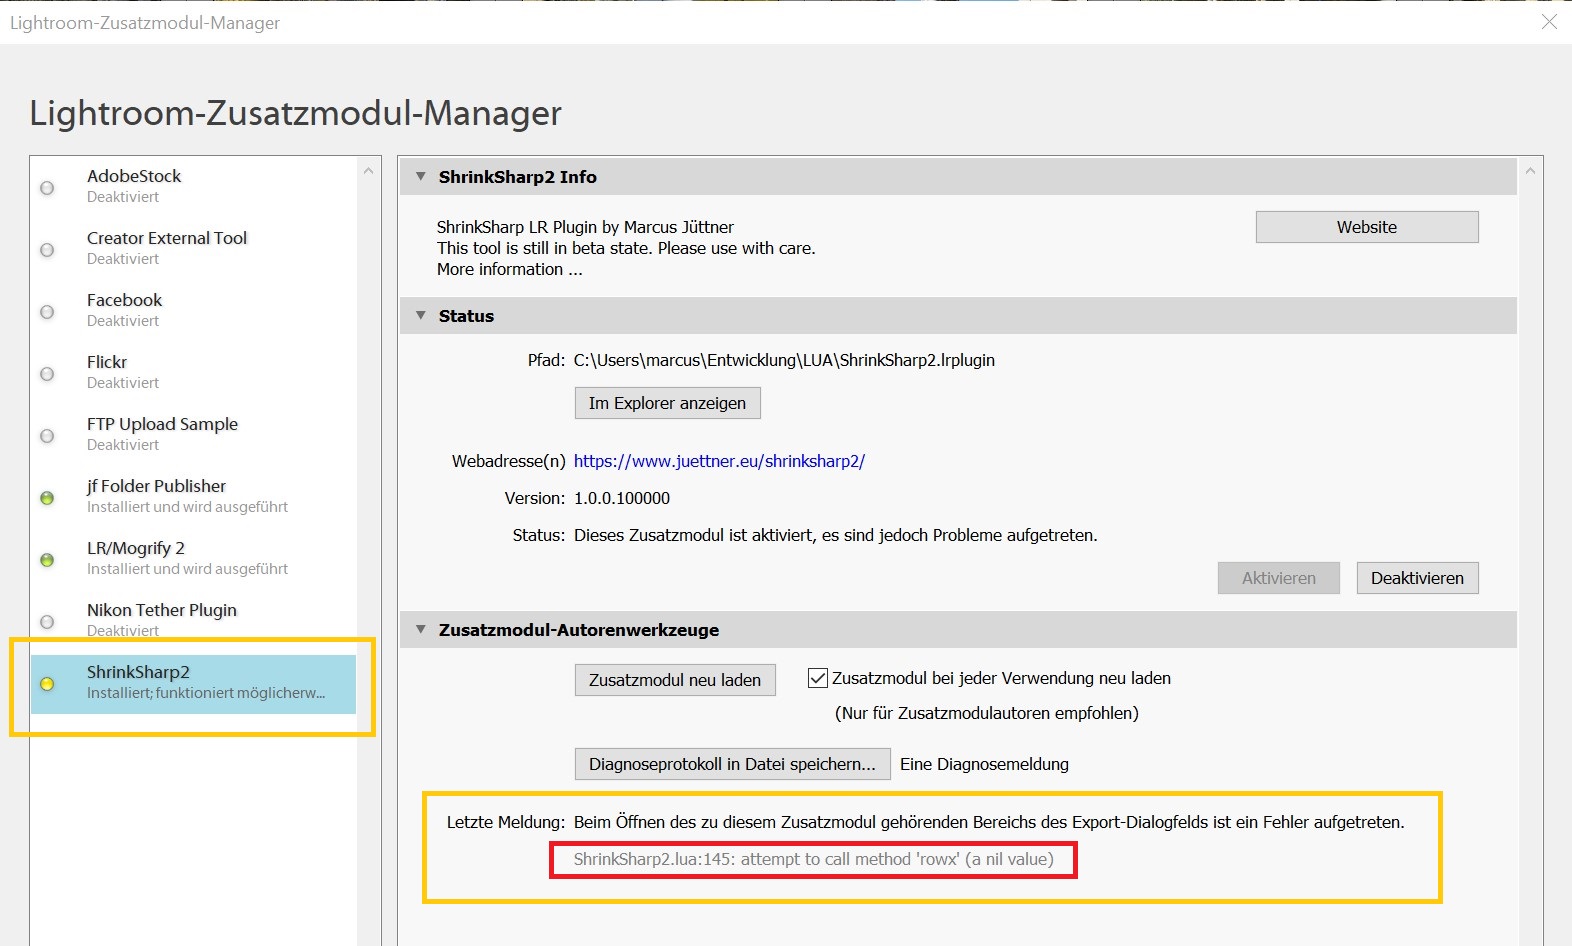 Debug info in PluginManager